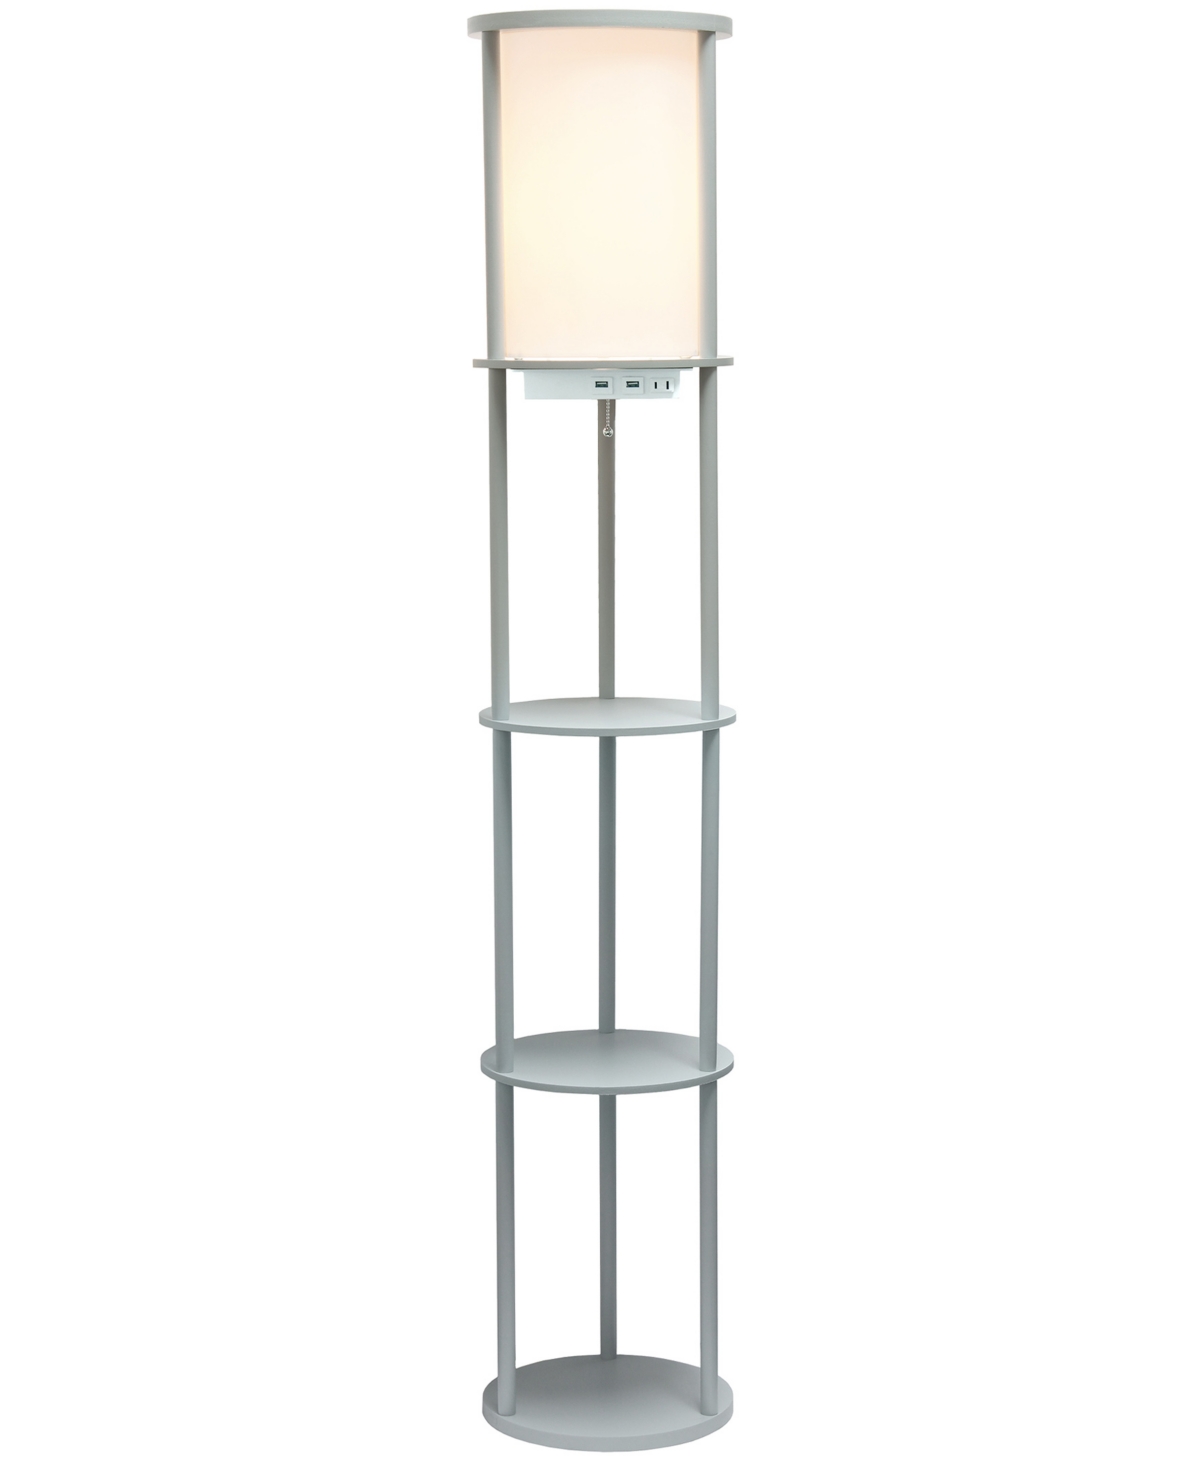 All The Rages Etagere Organizer Storage Floor Lamp With 2 Usb Charging Ports, 1 Charging Outlet In White